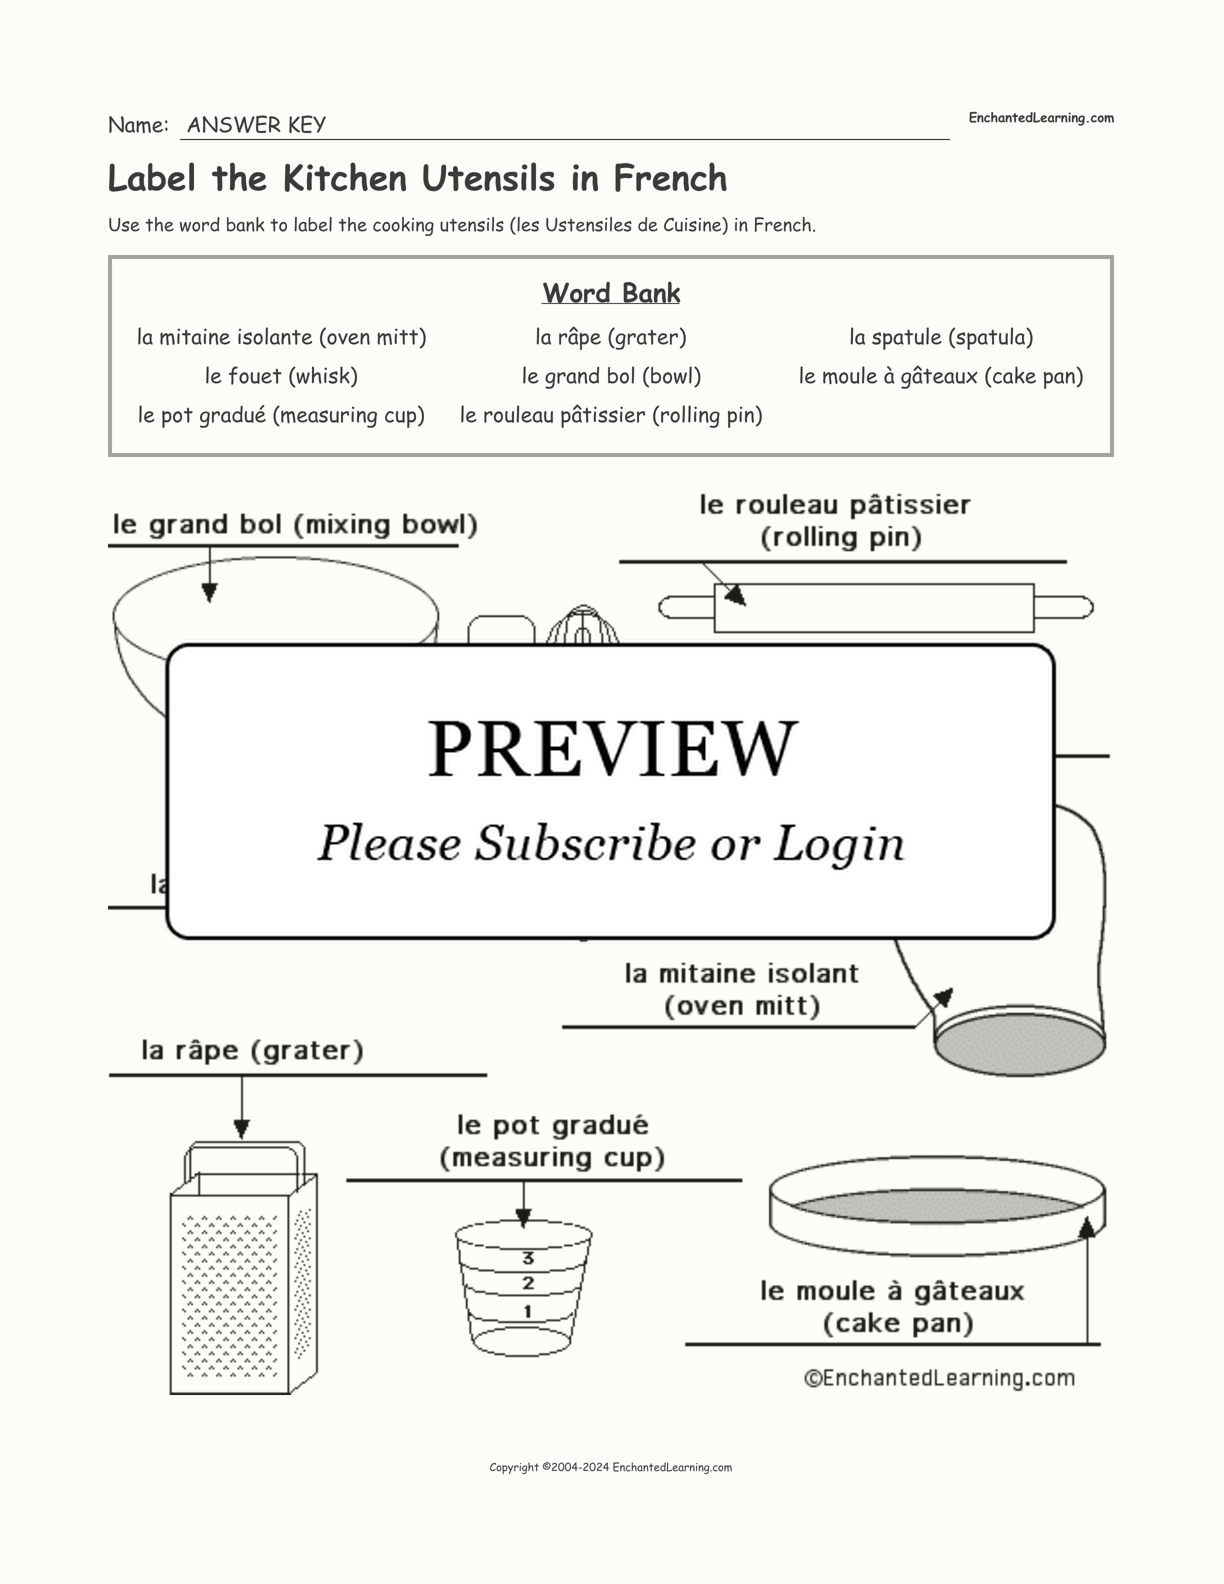 Label the Kitchen Utensils in French interactive worksheet page 2